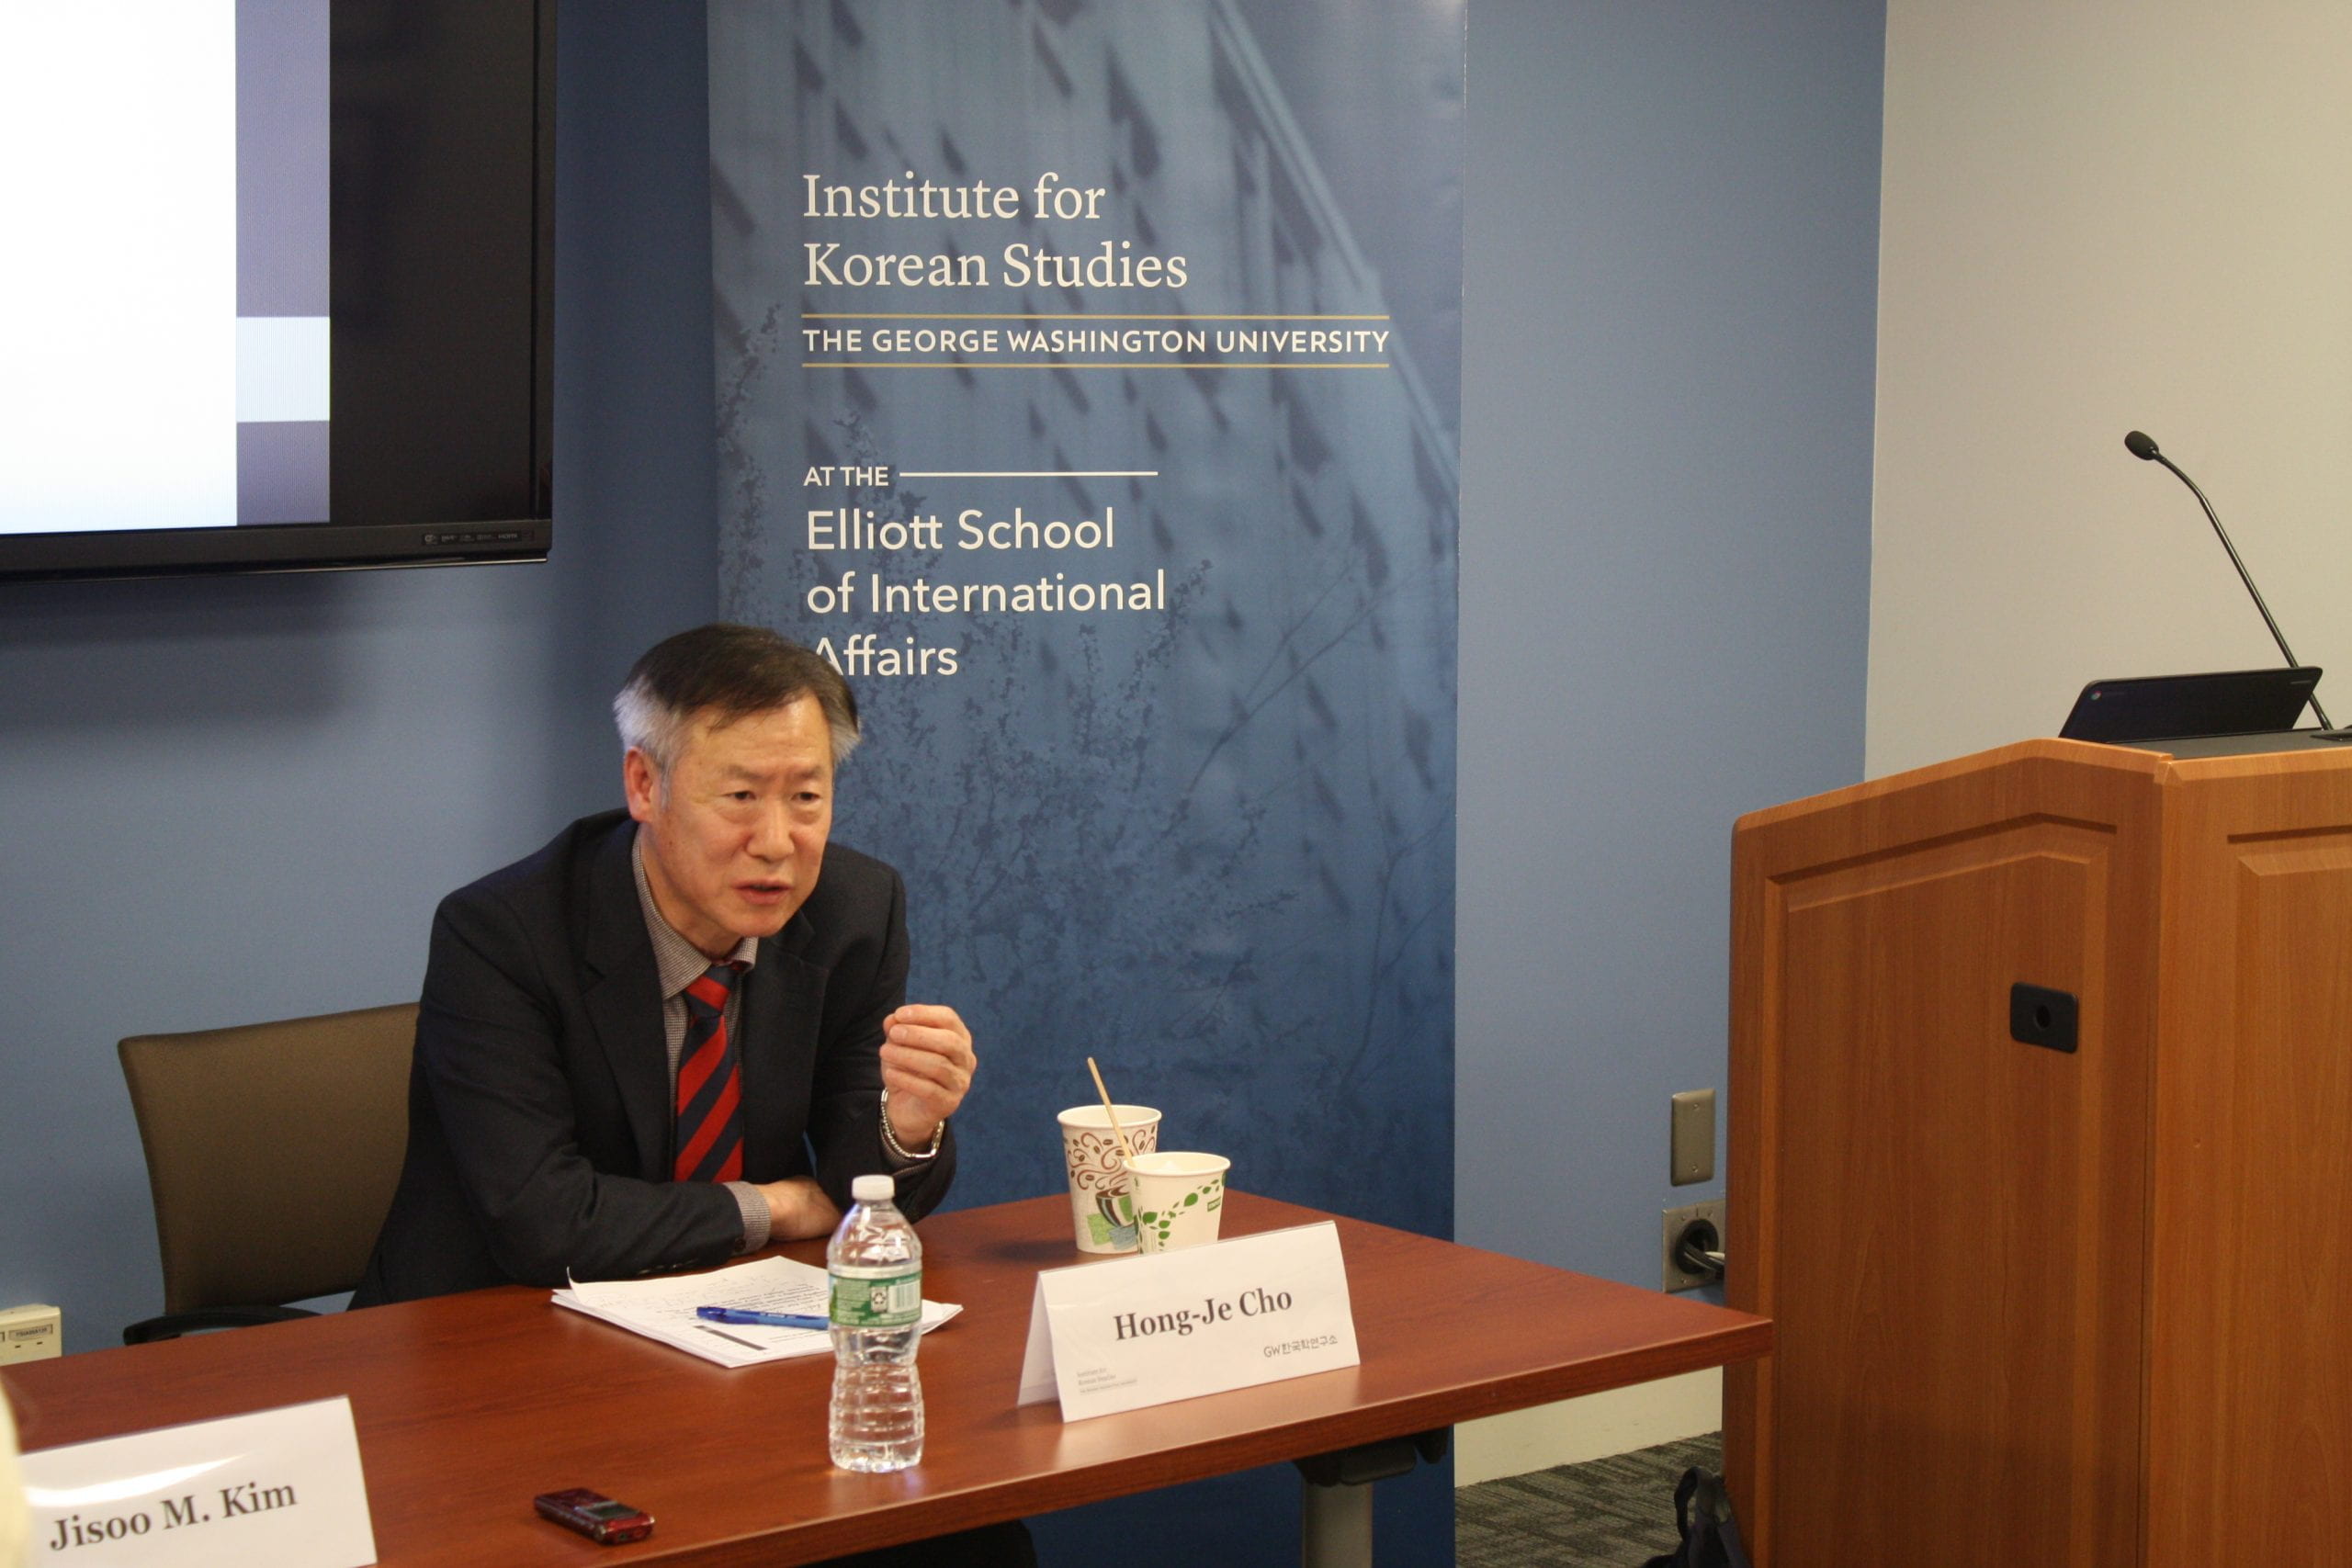 Cho Hong Je giving presentation during GWIKS Lecture Series event